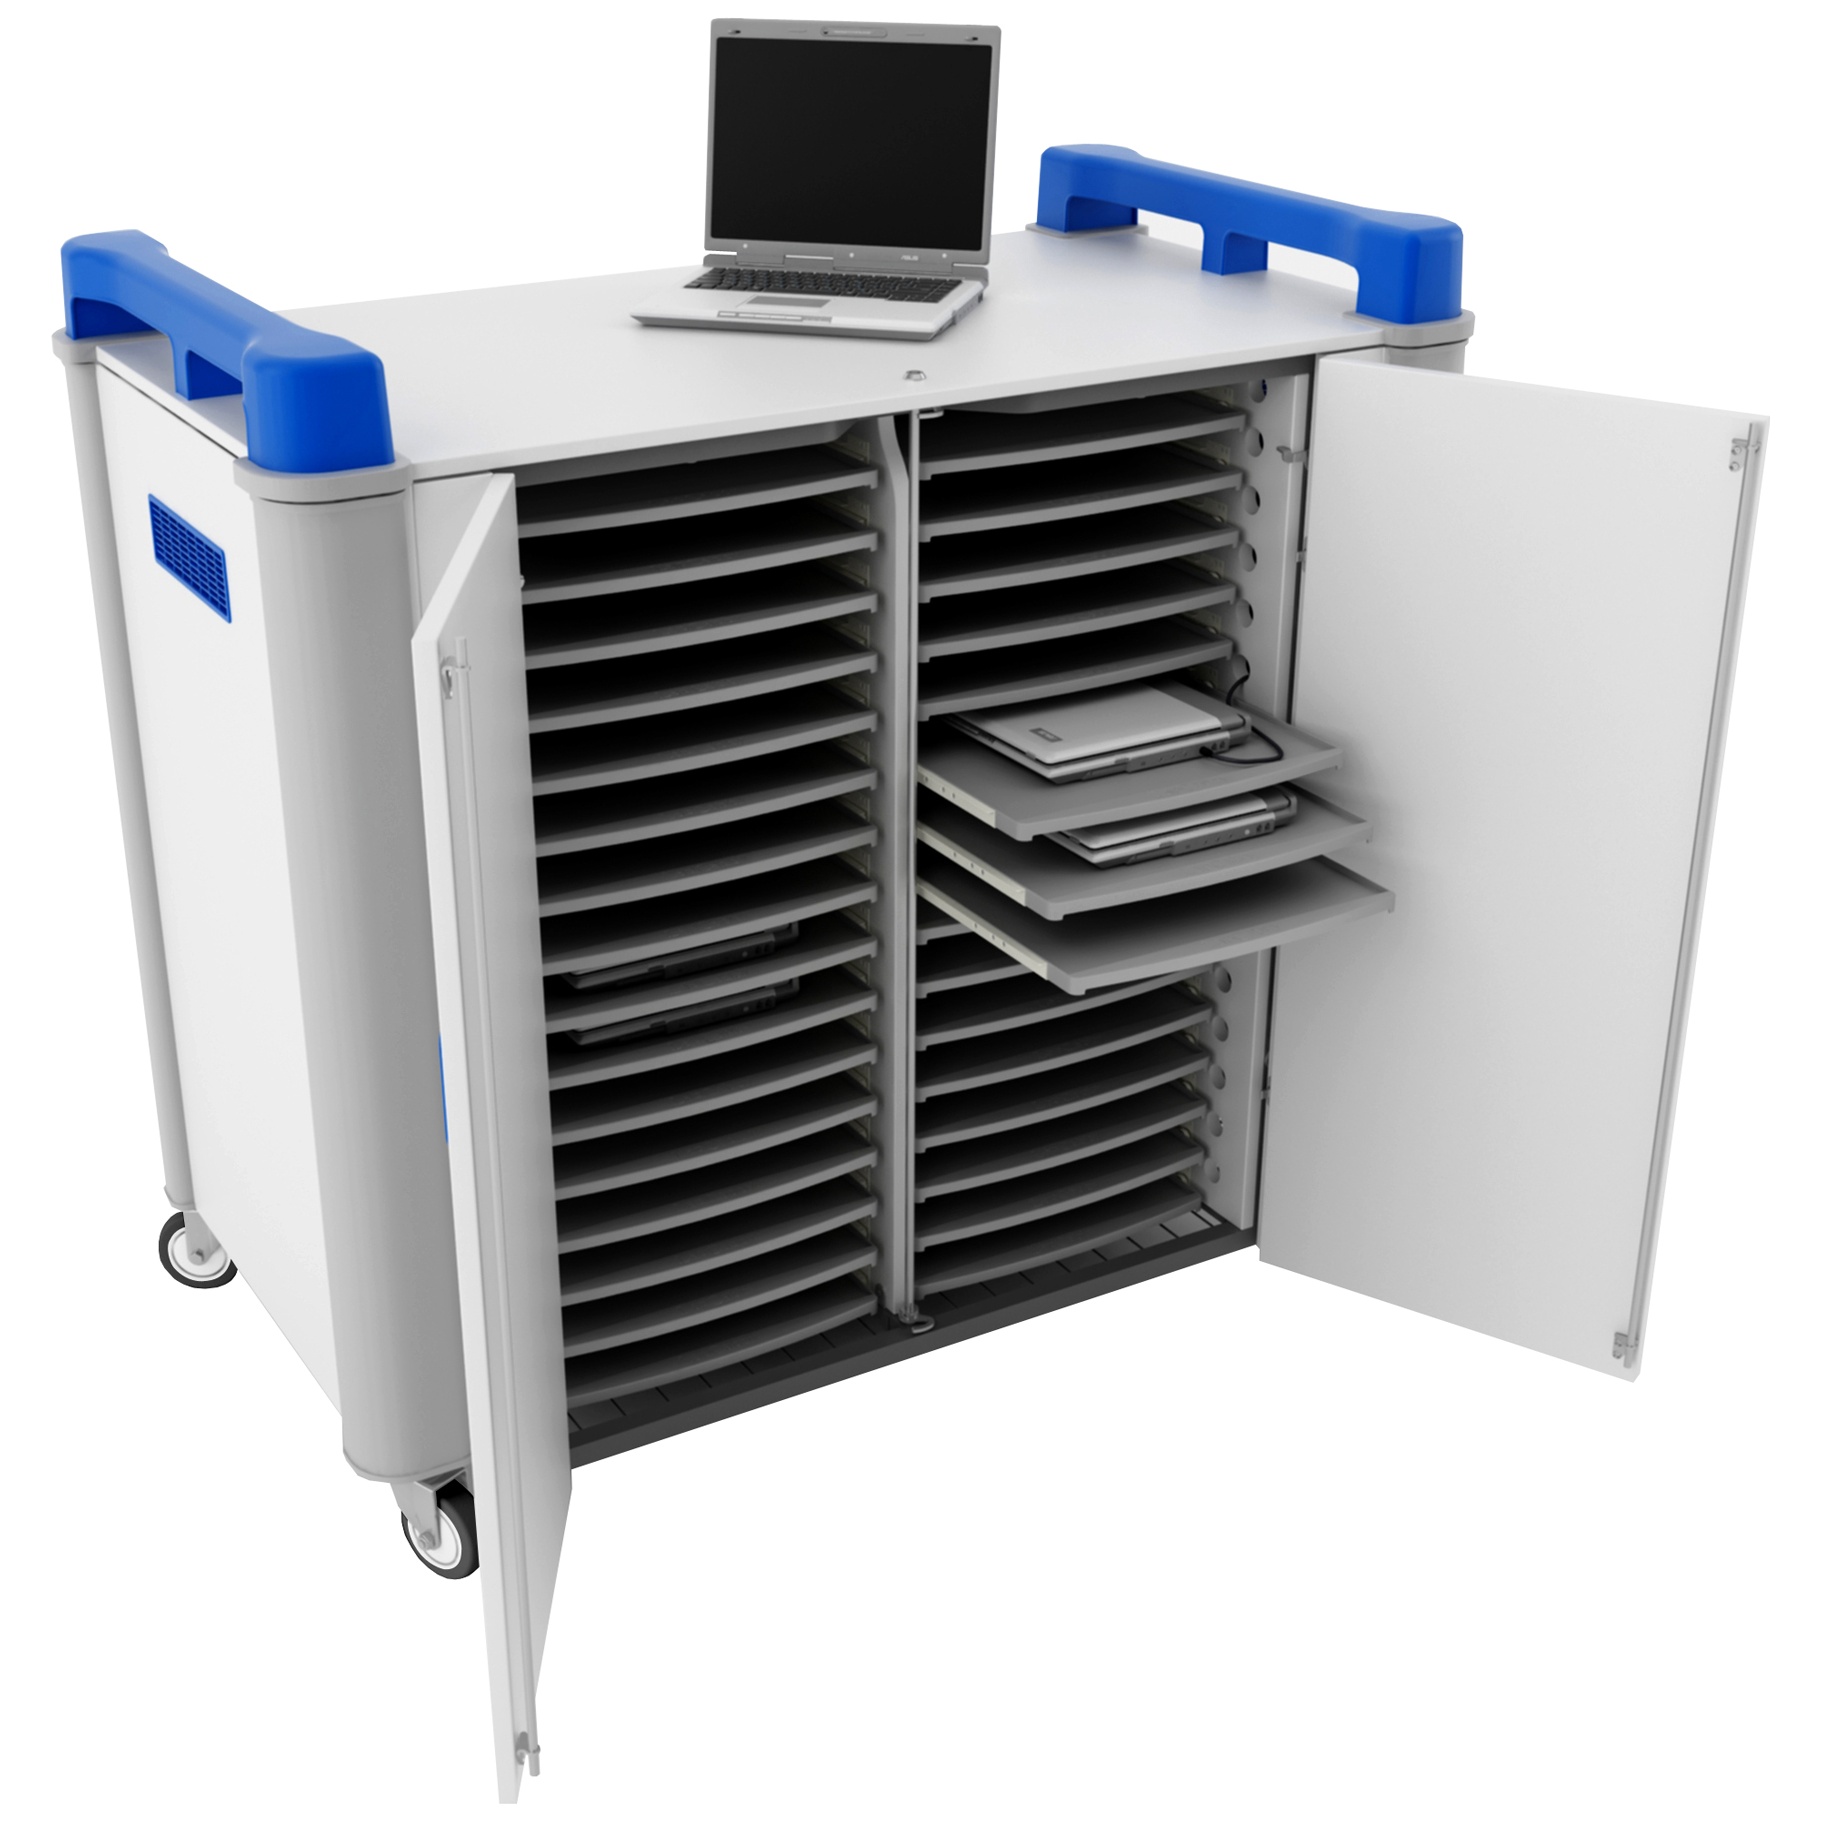 LapCabby 32H - 32 Horizontal Laptop Store and Charging Trolley